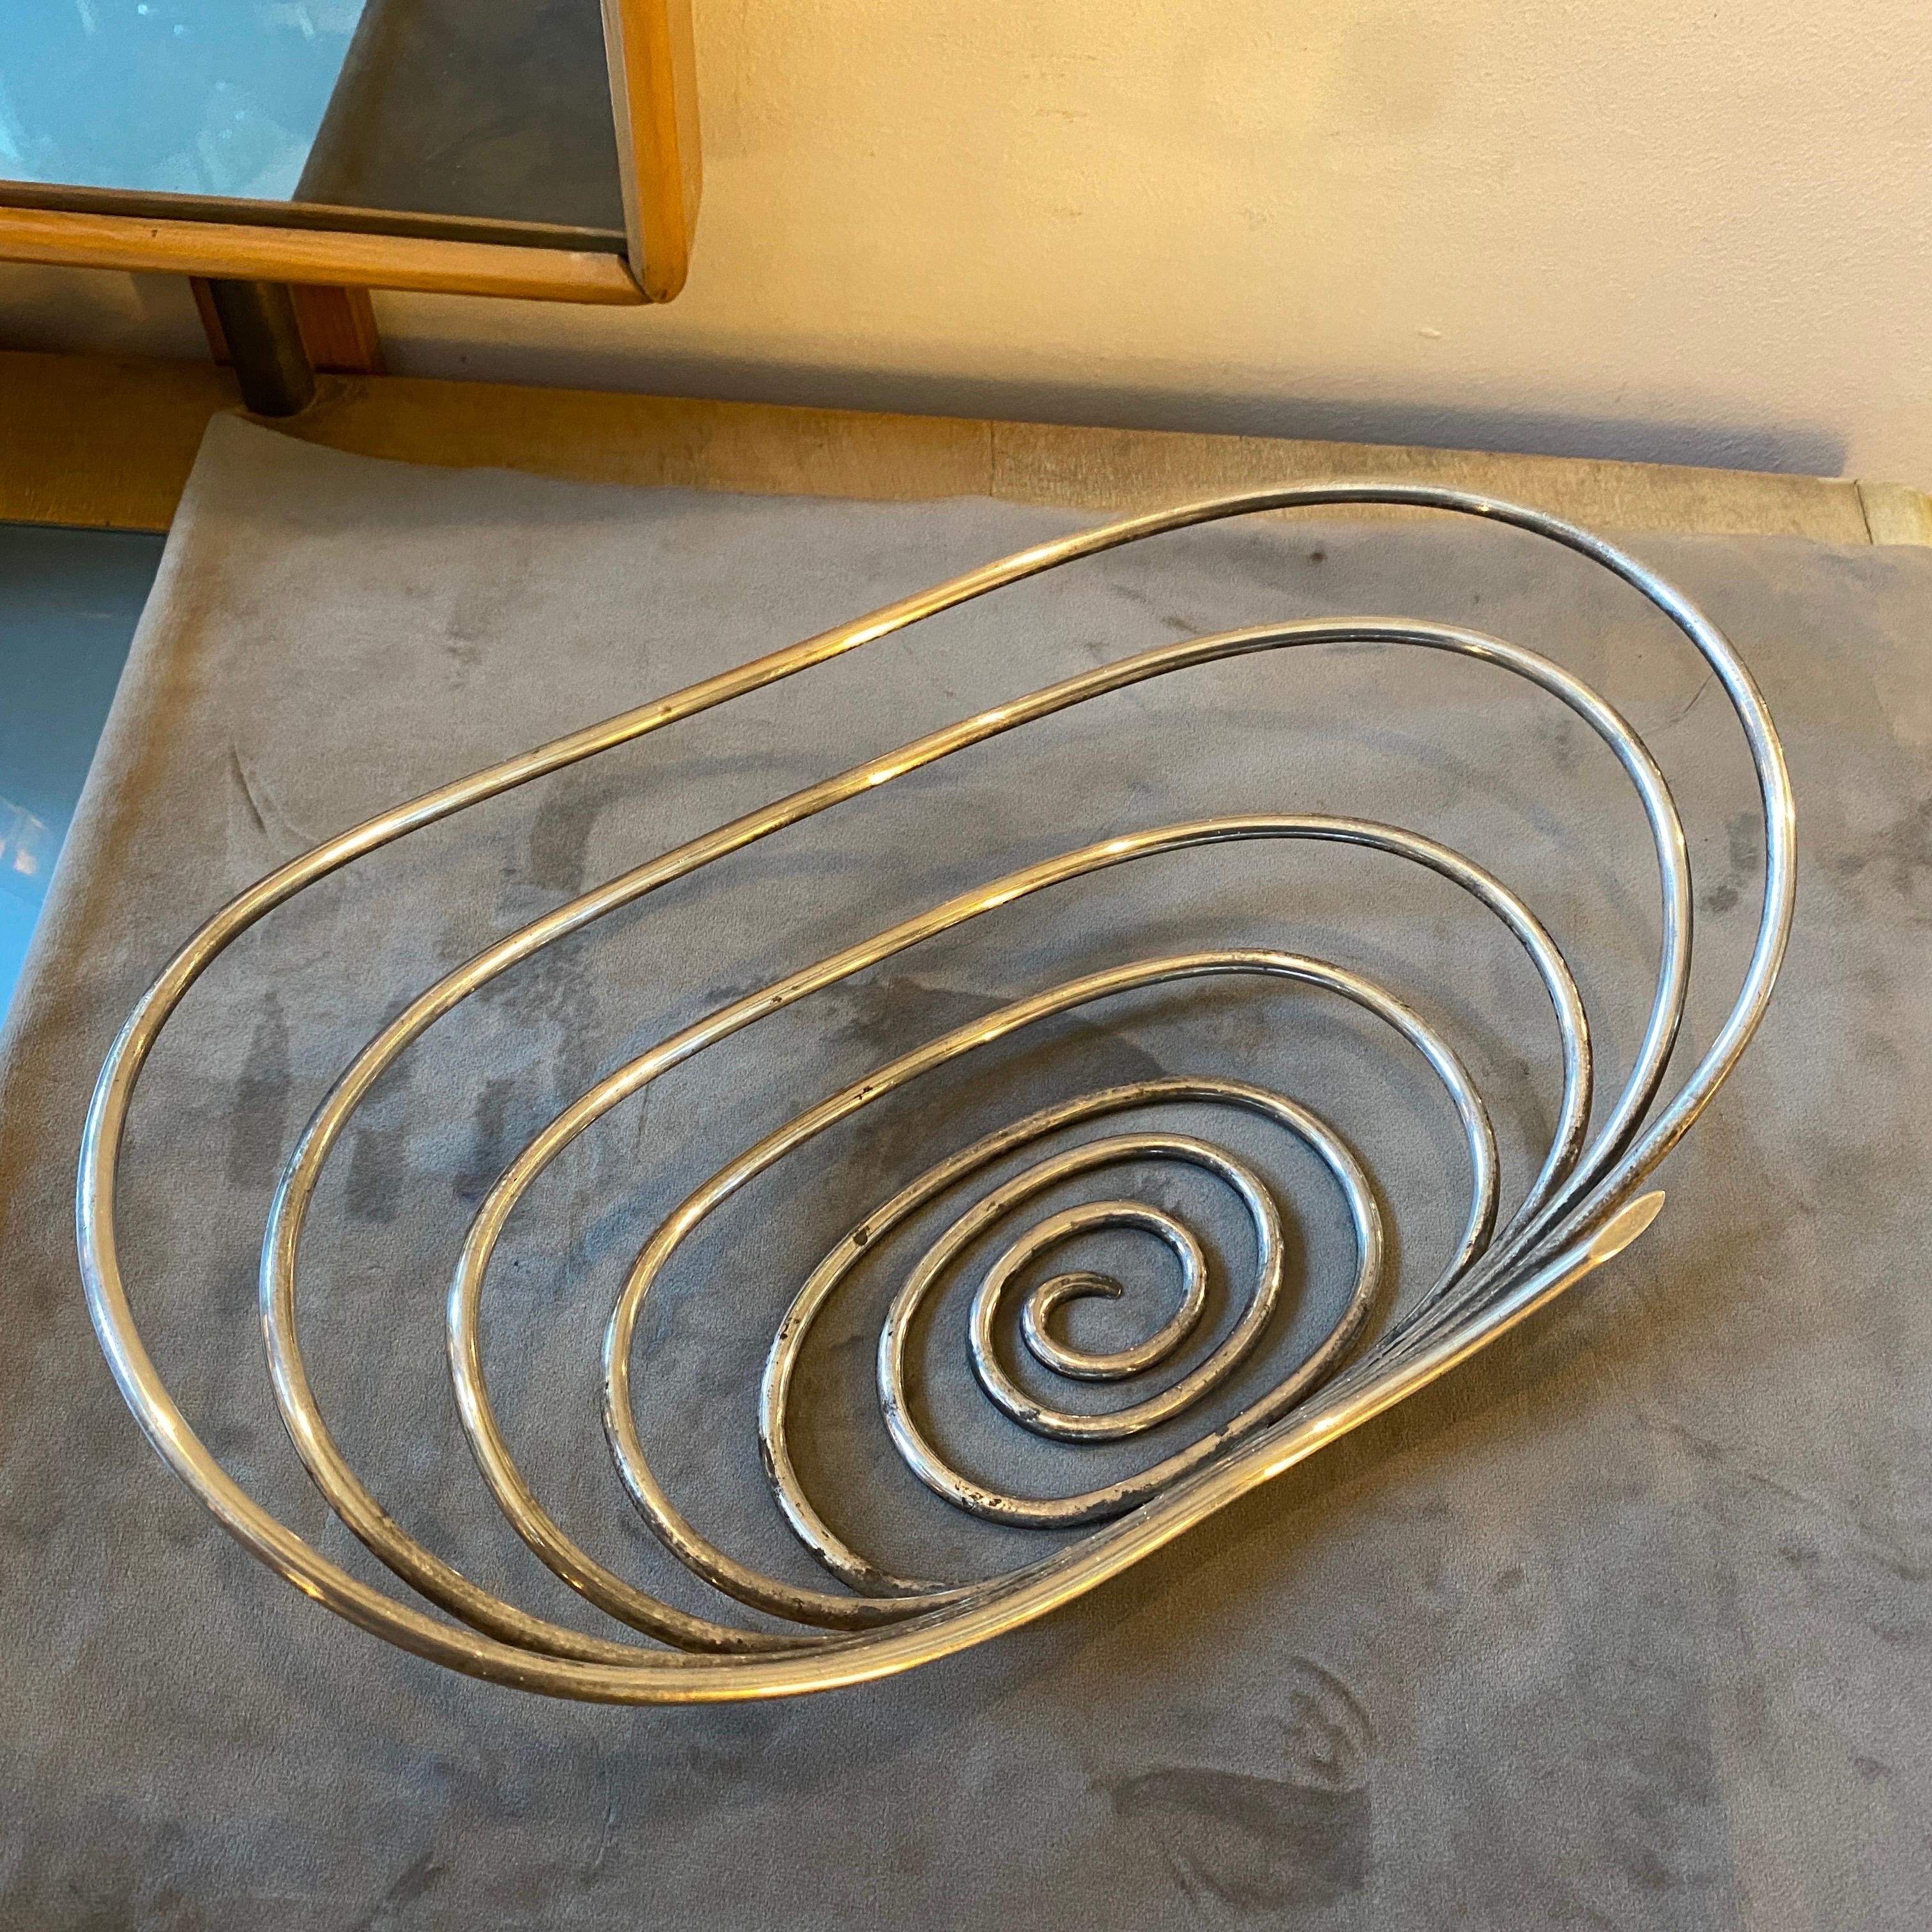 A stylish silver plated spiral bowl made in Italy in the Seventies by Sabattini argenteria. this piece it's in original patina, it can be easily cleaned. It's an iconic modernist piece of the italian designer Lino Sabattini. This spiral basket is a